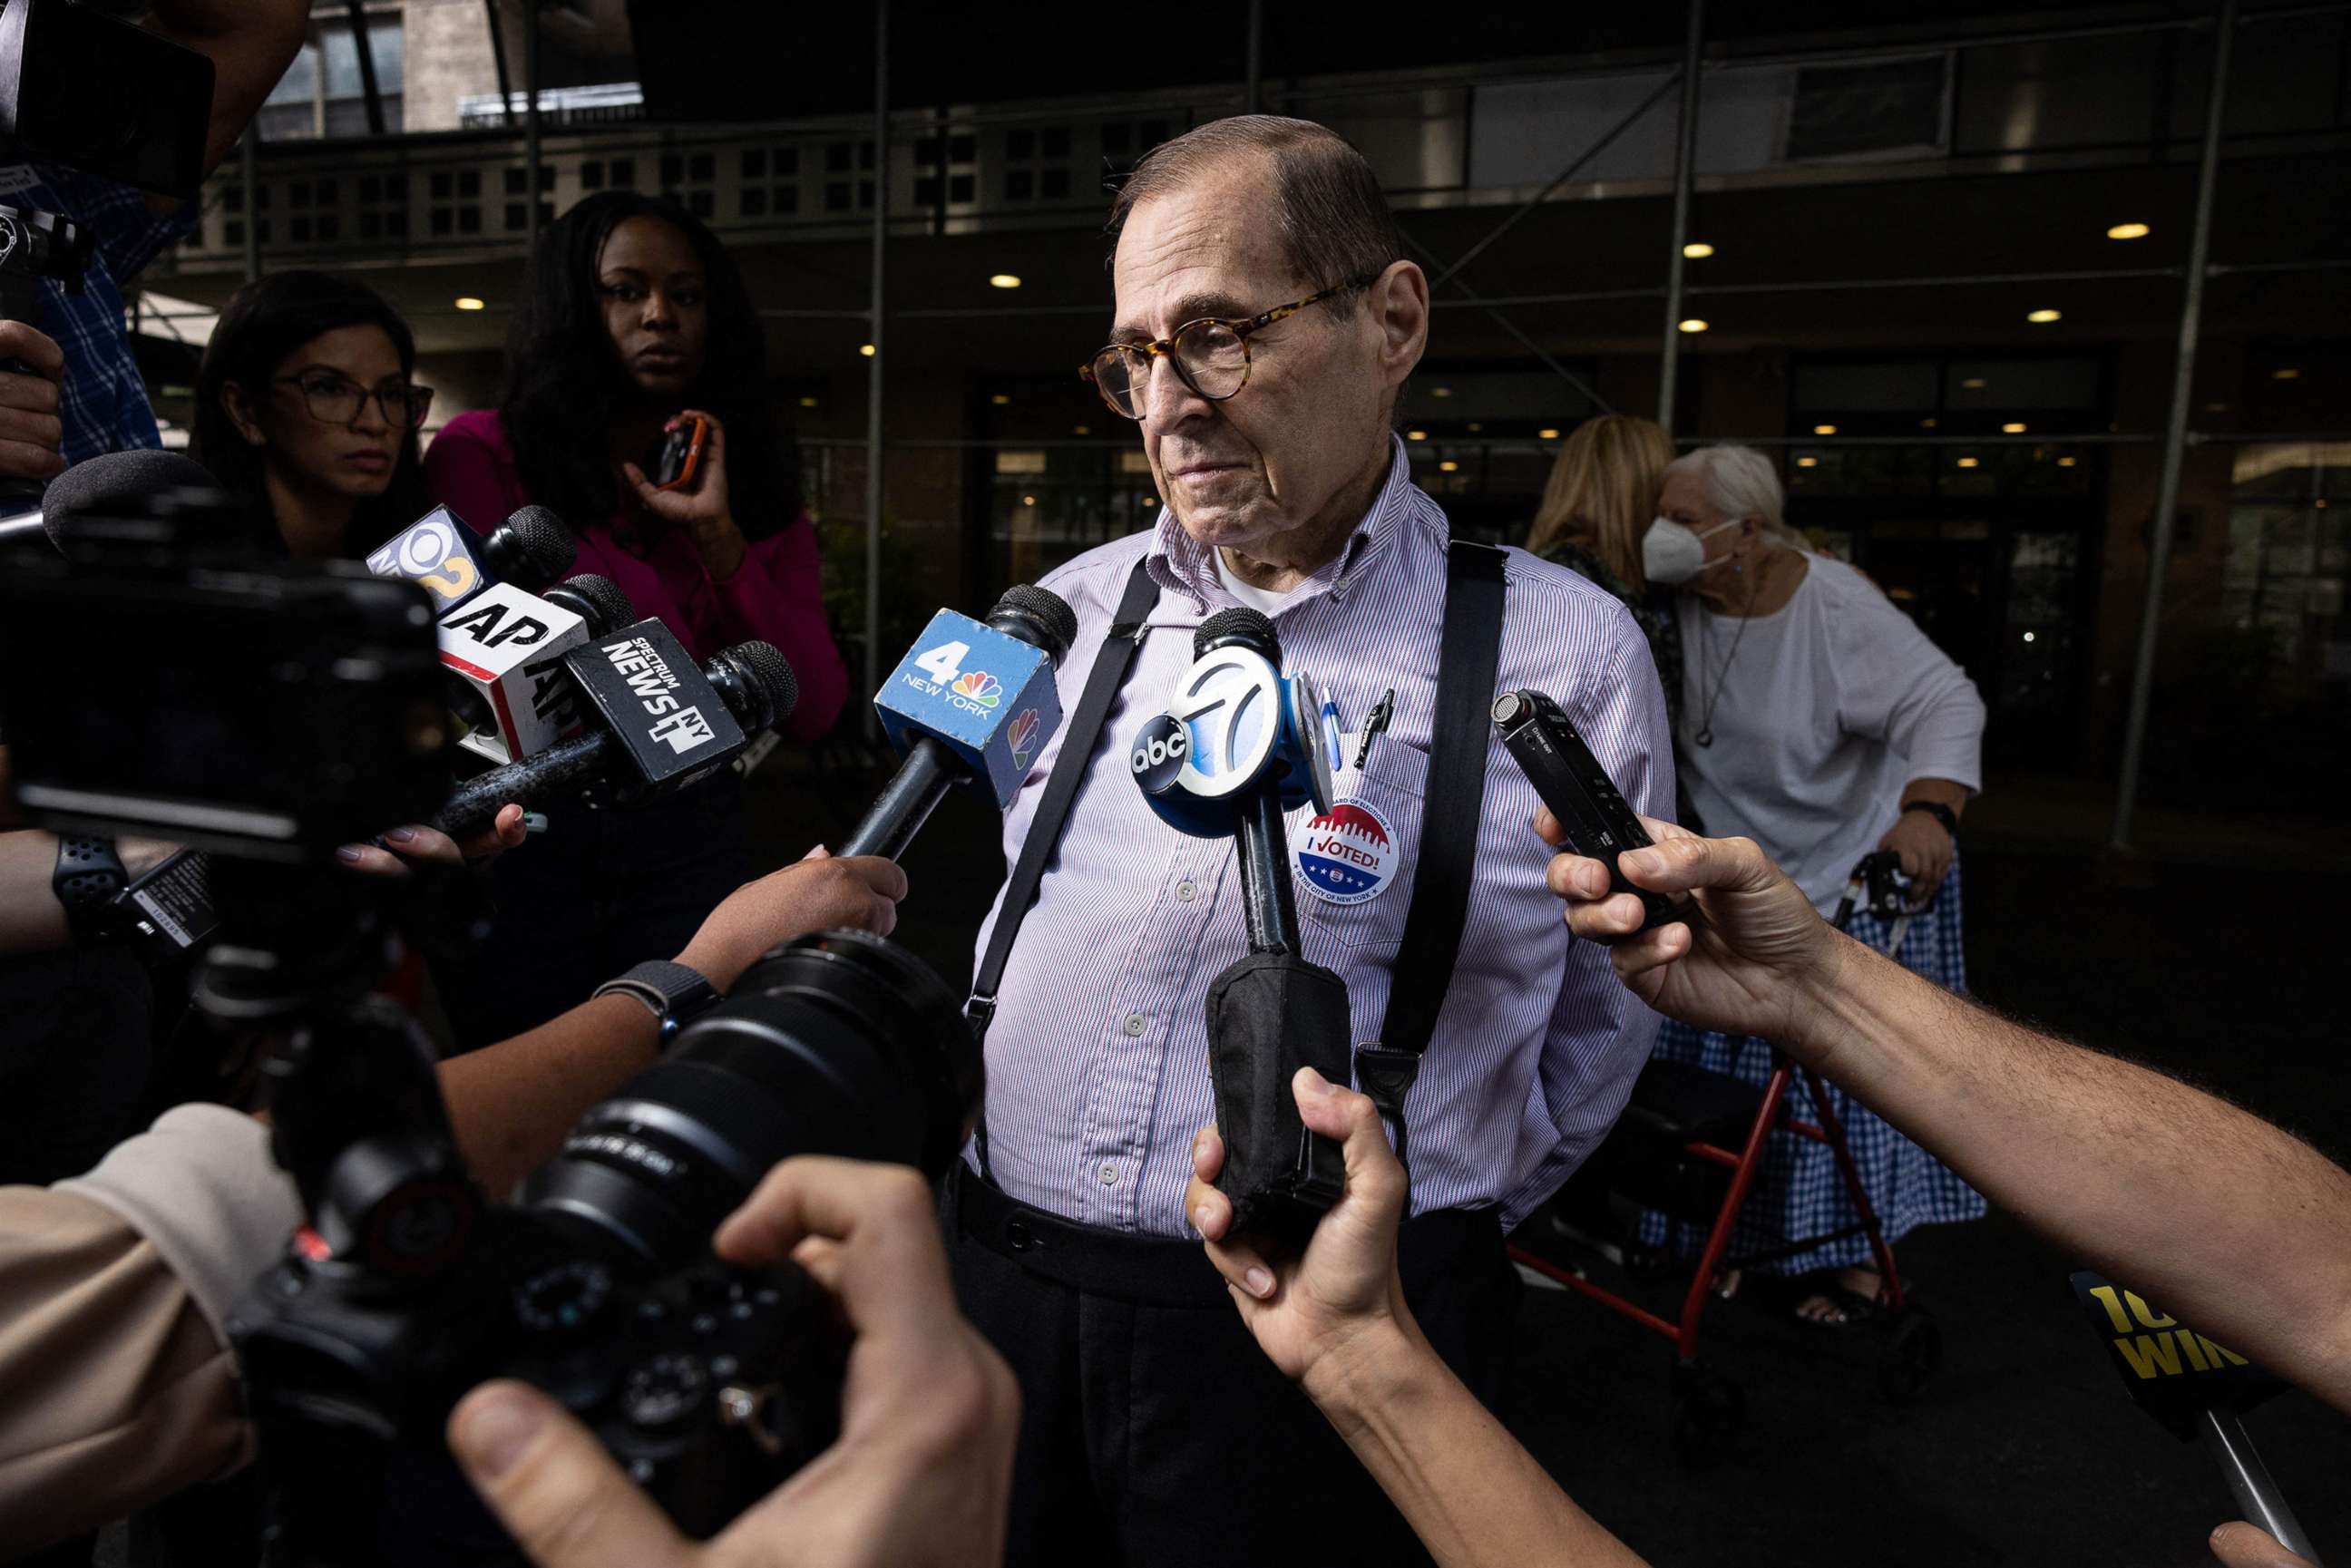 PHOTO: US Representative Jerry Nadler, Democrat of New York, and candidate for New York's 12th congressional district, speaks to the press after voting during Primary Election Day in New York, Aug. 23, 2022.